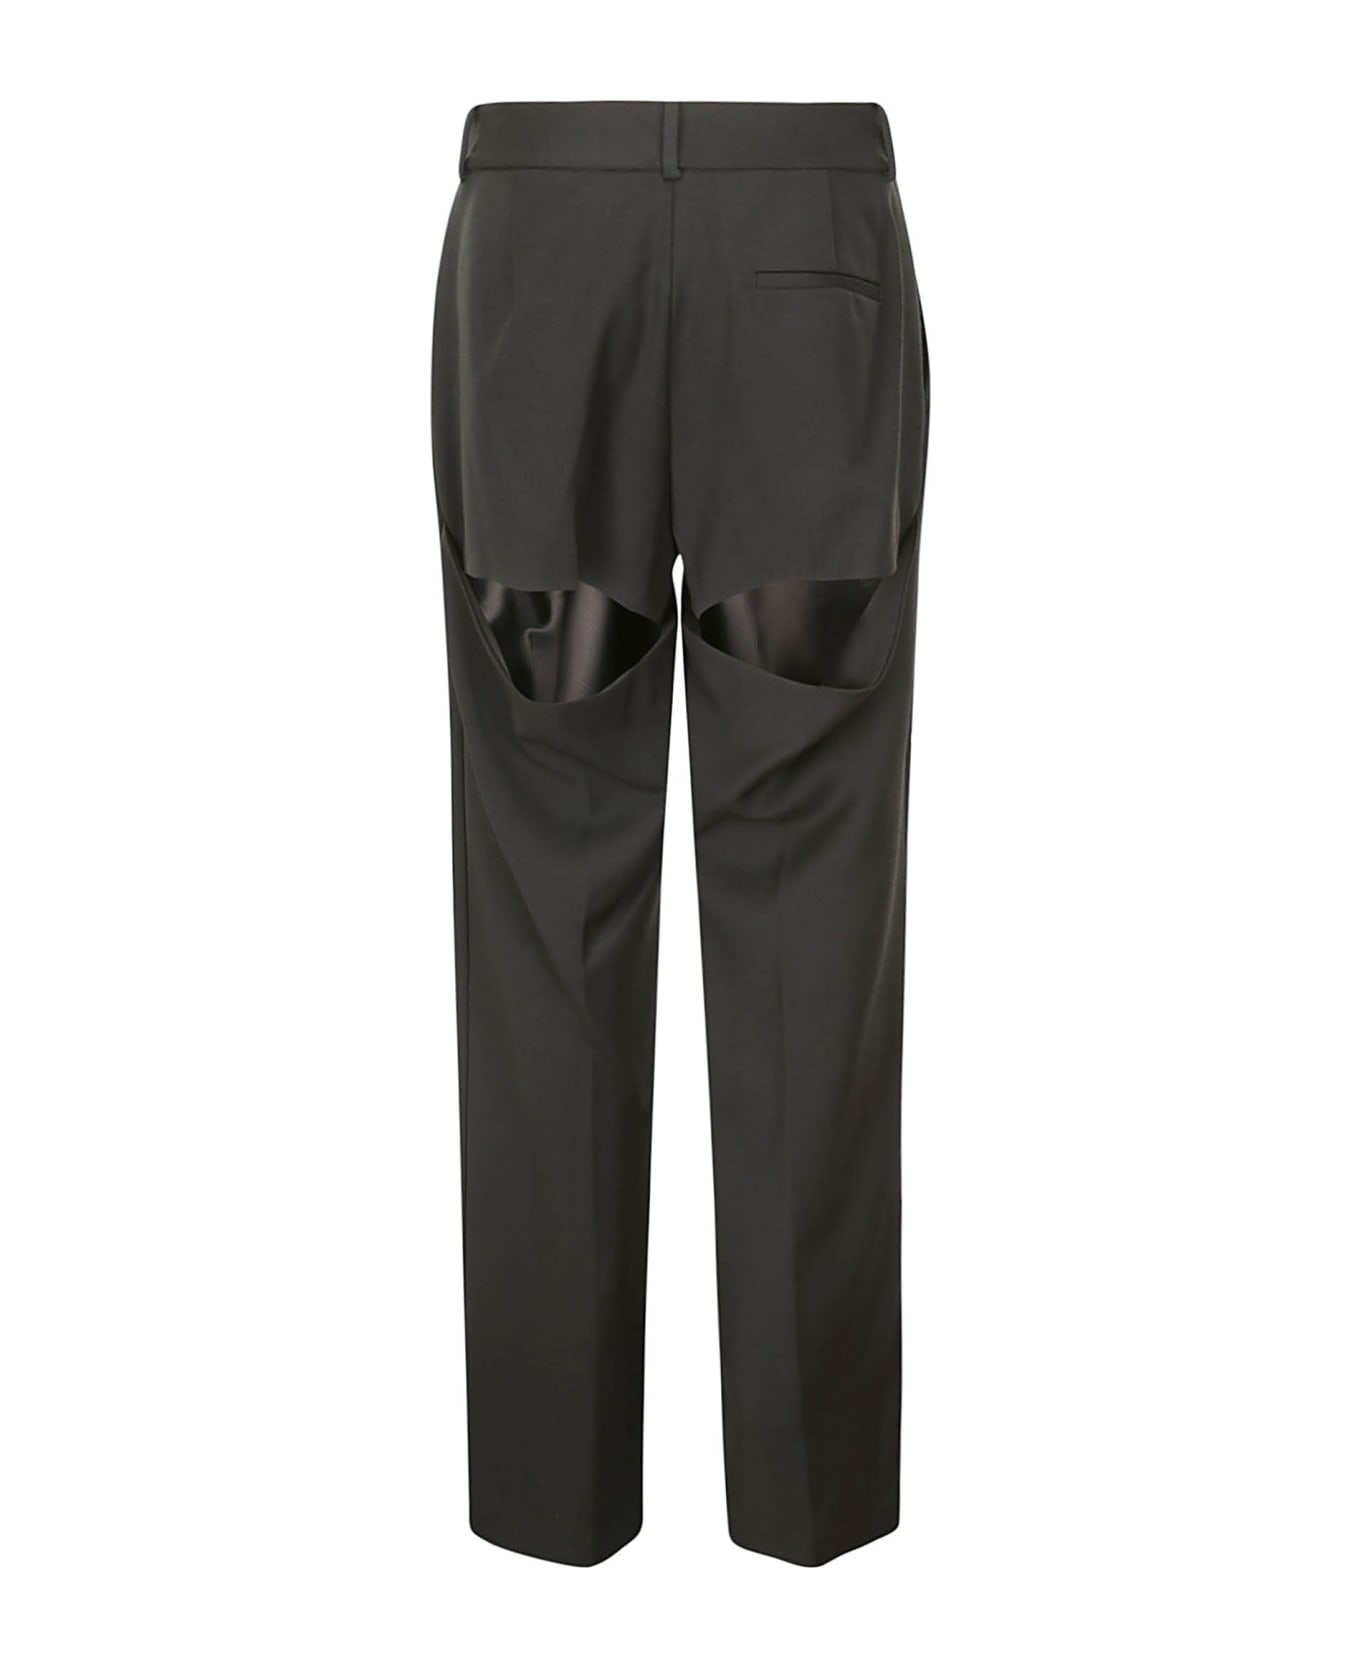 AREA Crystal Button Slit Trouser - CHARCOAL ボトムス